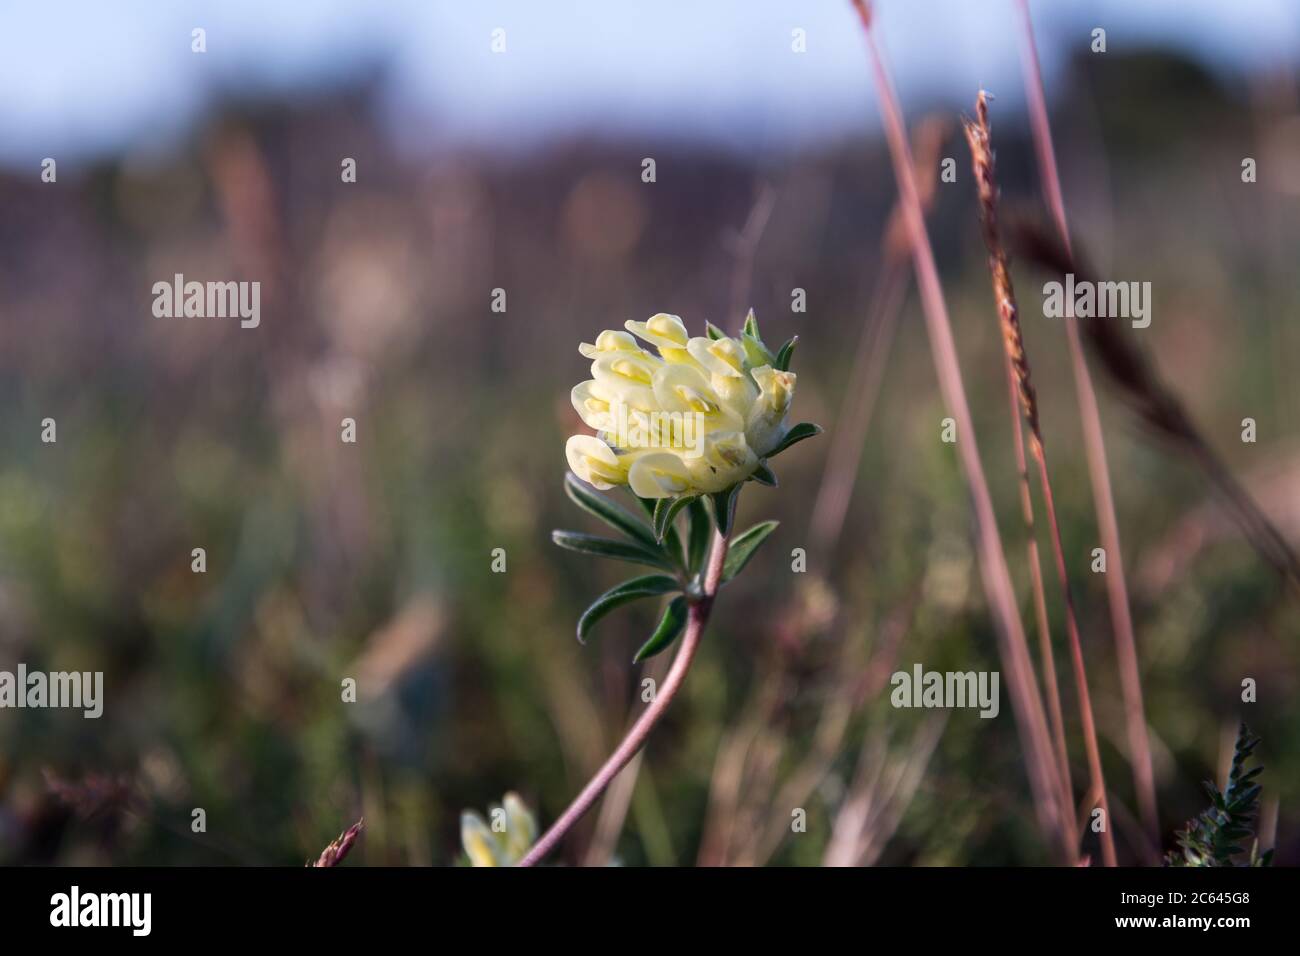 Yellow Kidney vetch flower close up on the island Oland in Sweden Stock Photo